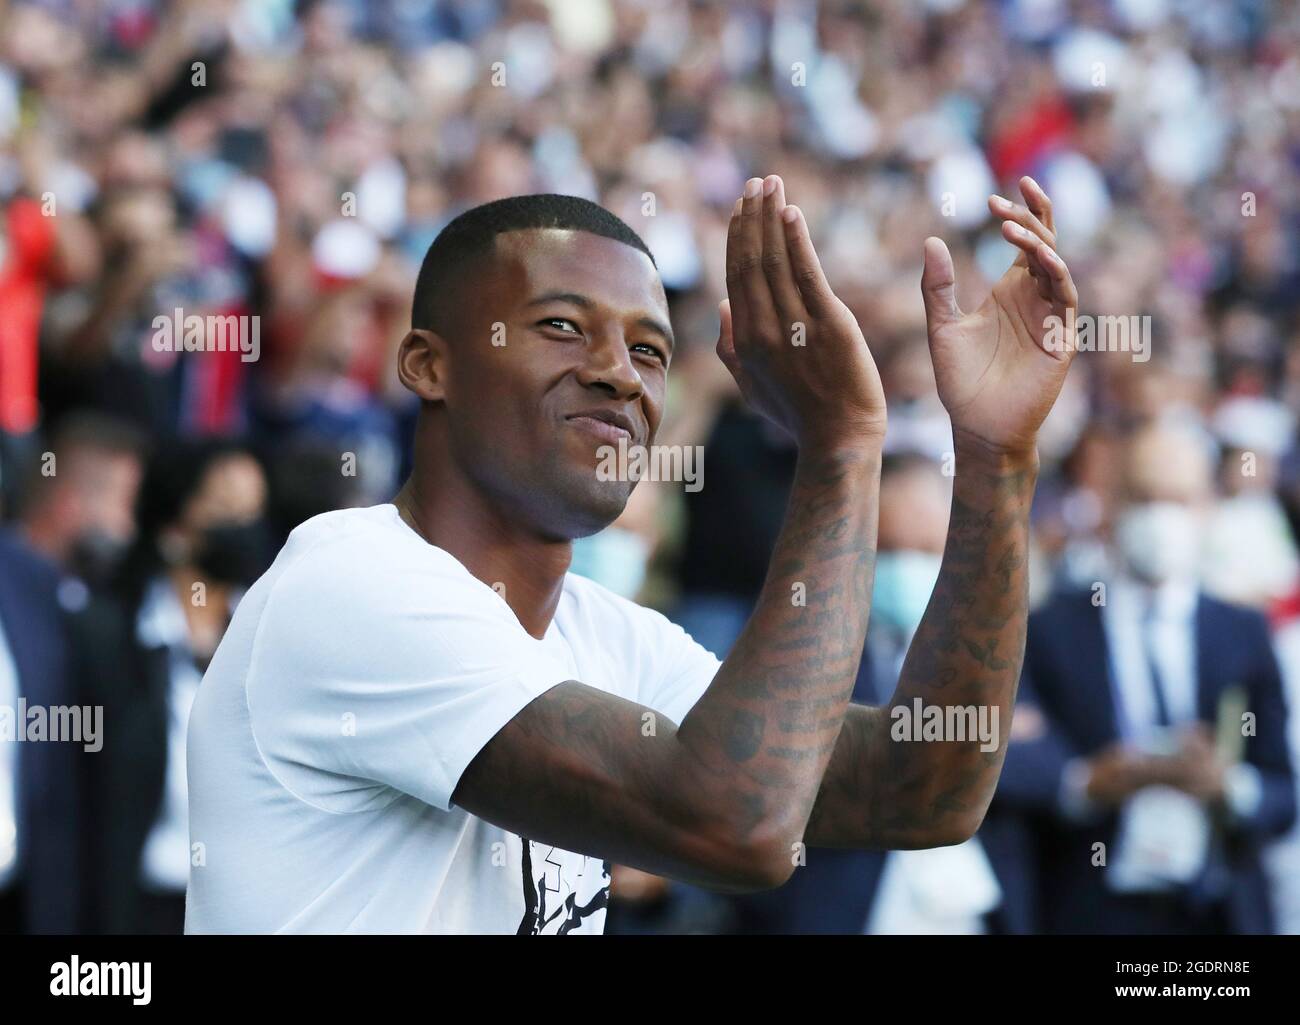 Paris, France. 14th Aug, 2021. Dutch midfielder Georginio Wijnaldum attends the new recruits presentation ceremony prior to the French Ligue 1 football match between Paris Saint-Germain and Racing Club Strasbourg at the Parc des Princes stadium in Paris, France, Aug. 14, 2021. Credit: Gao Jing/Xinhua/Alamy Live News Stock Photo